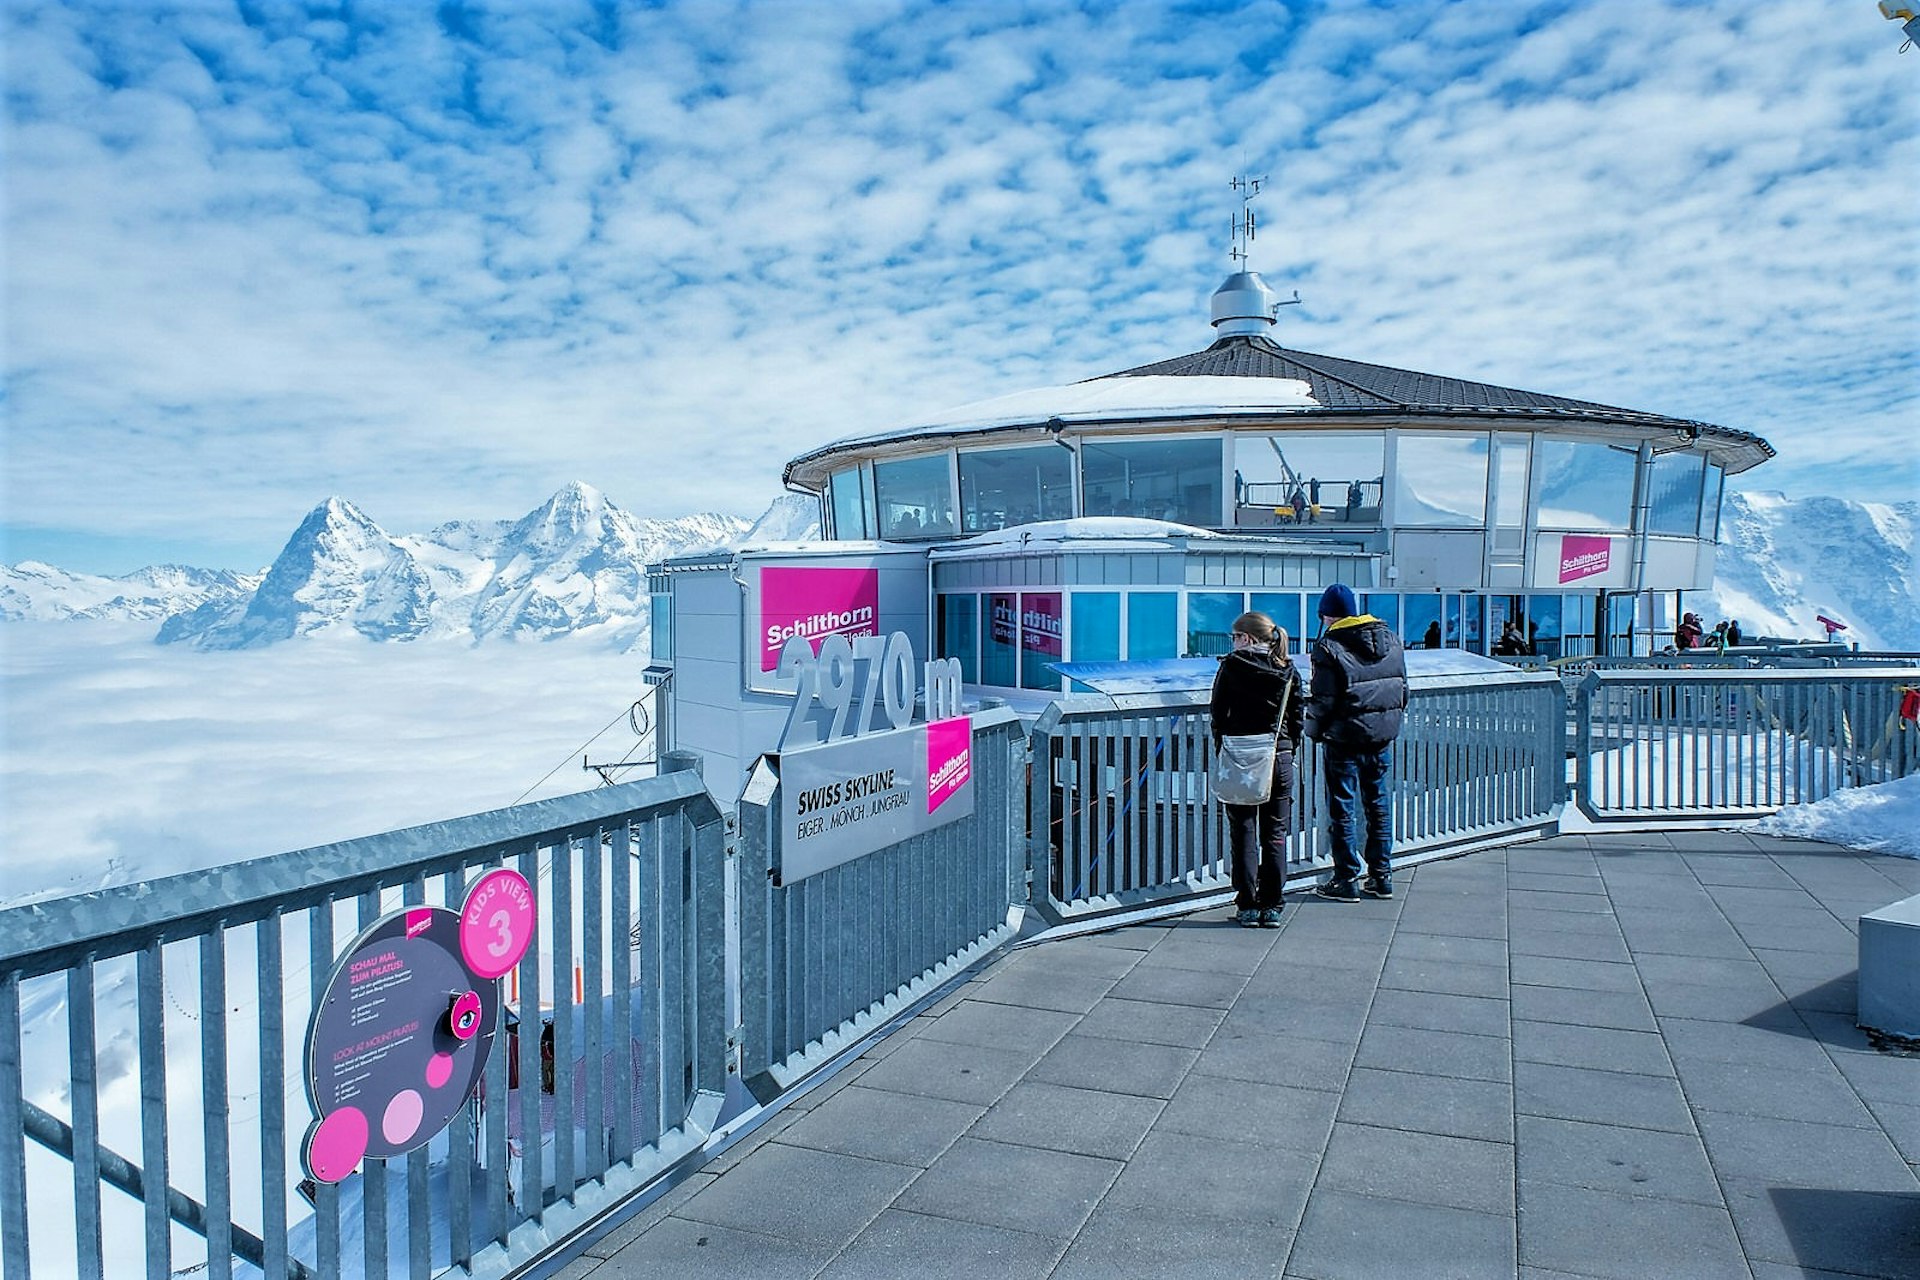 People at the top of the Schilthorn mountain enjoy the view of the surrounding mountains